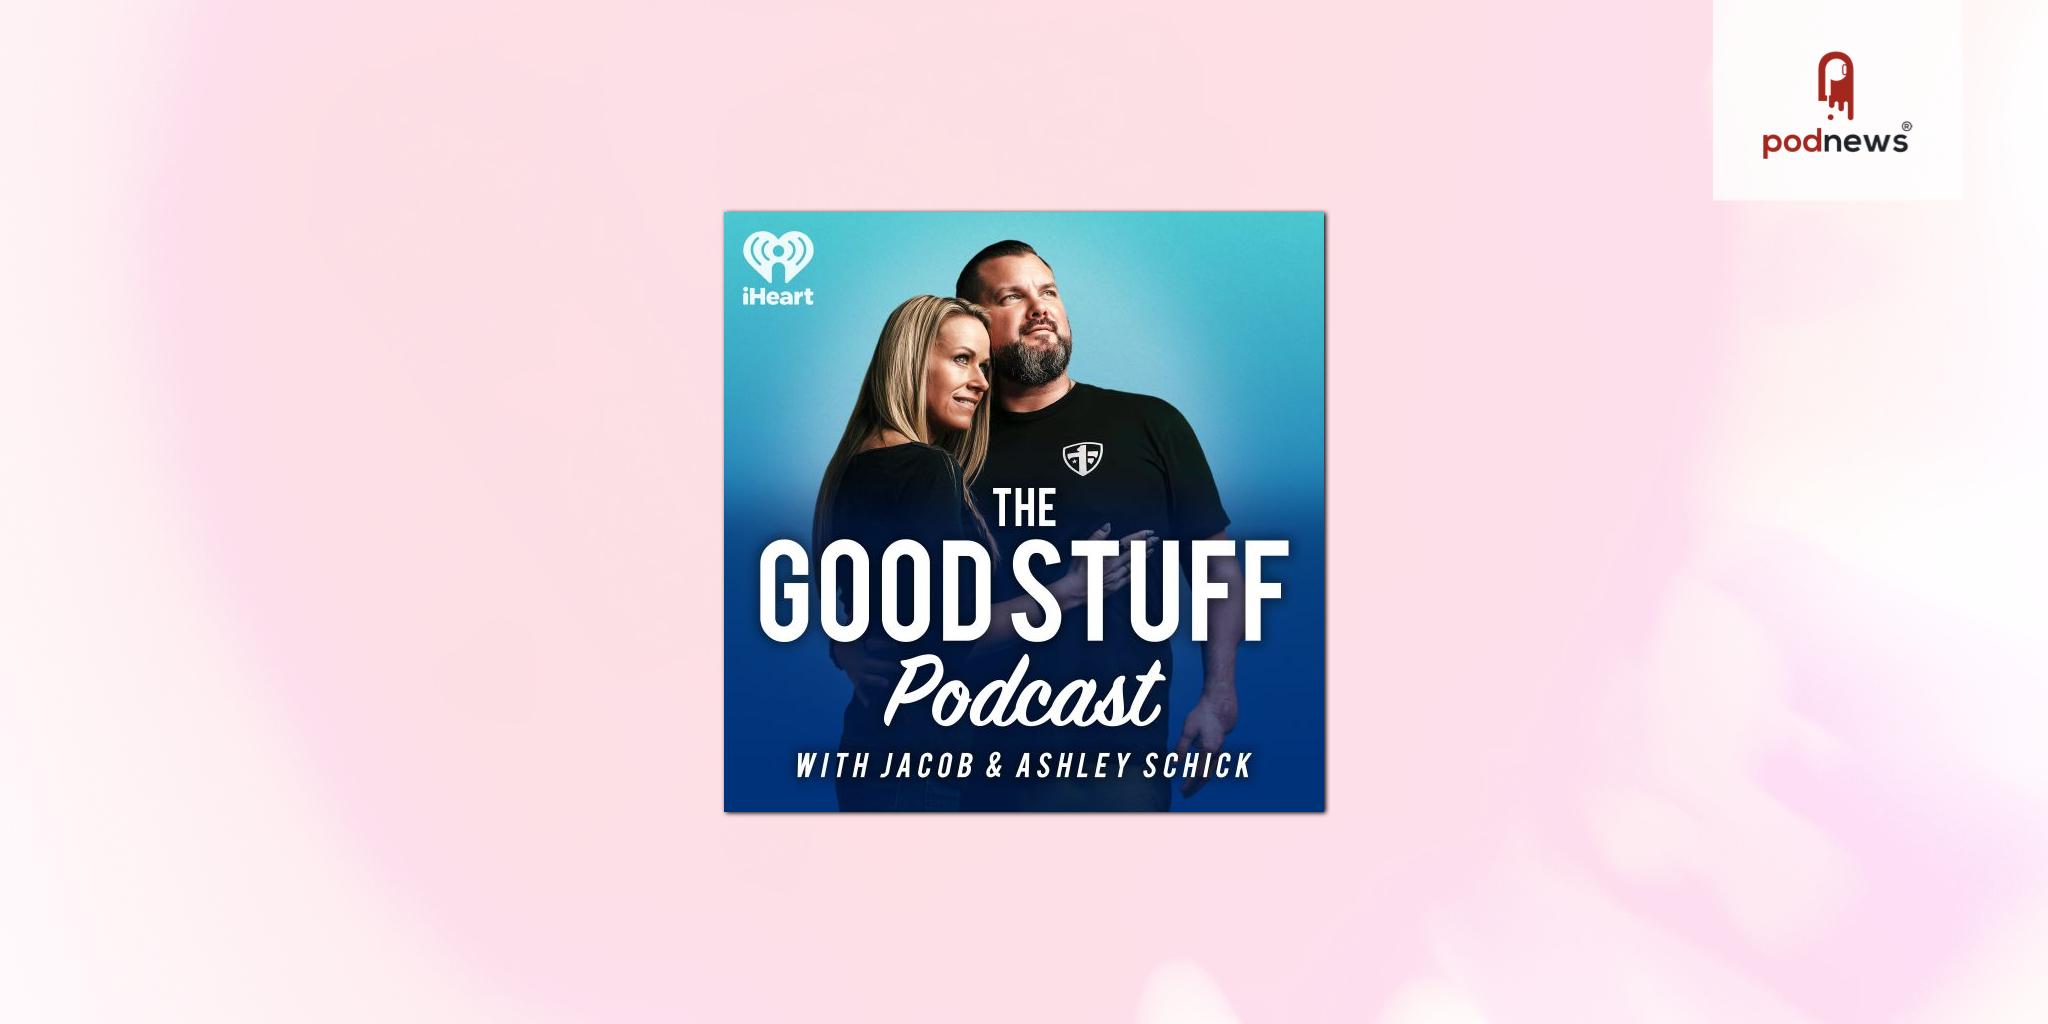 The Good Stuff podcast to release special 9/11 episode with retired FDNY firefighter